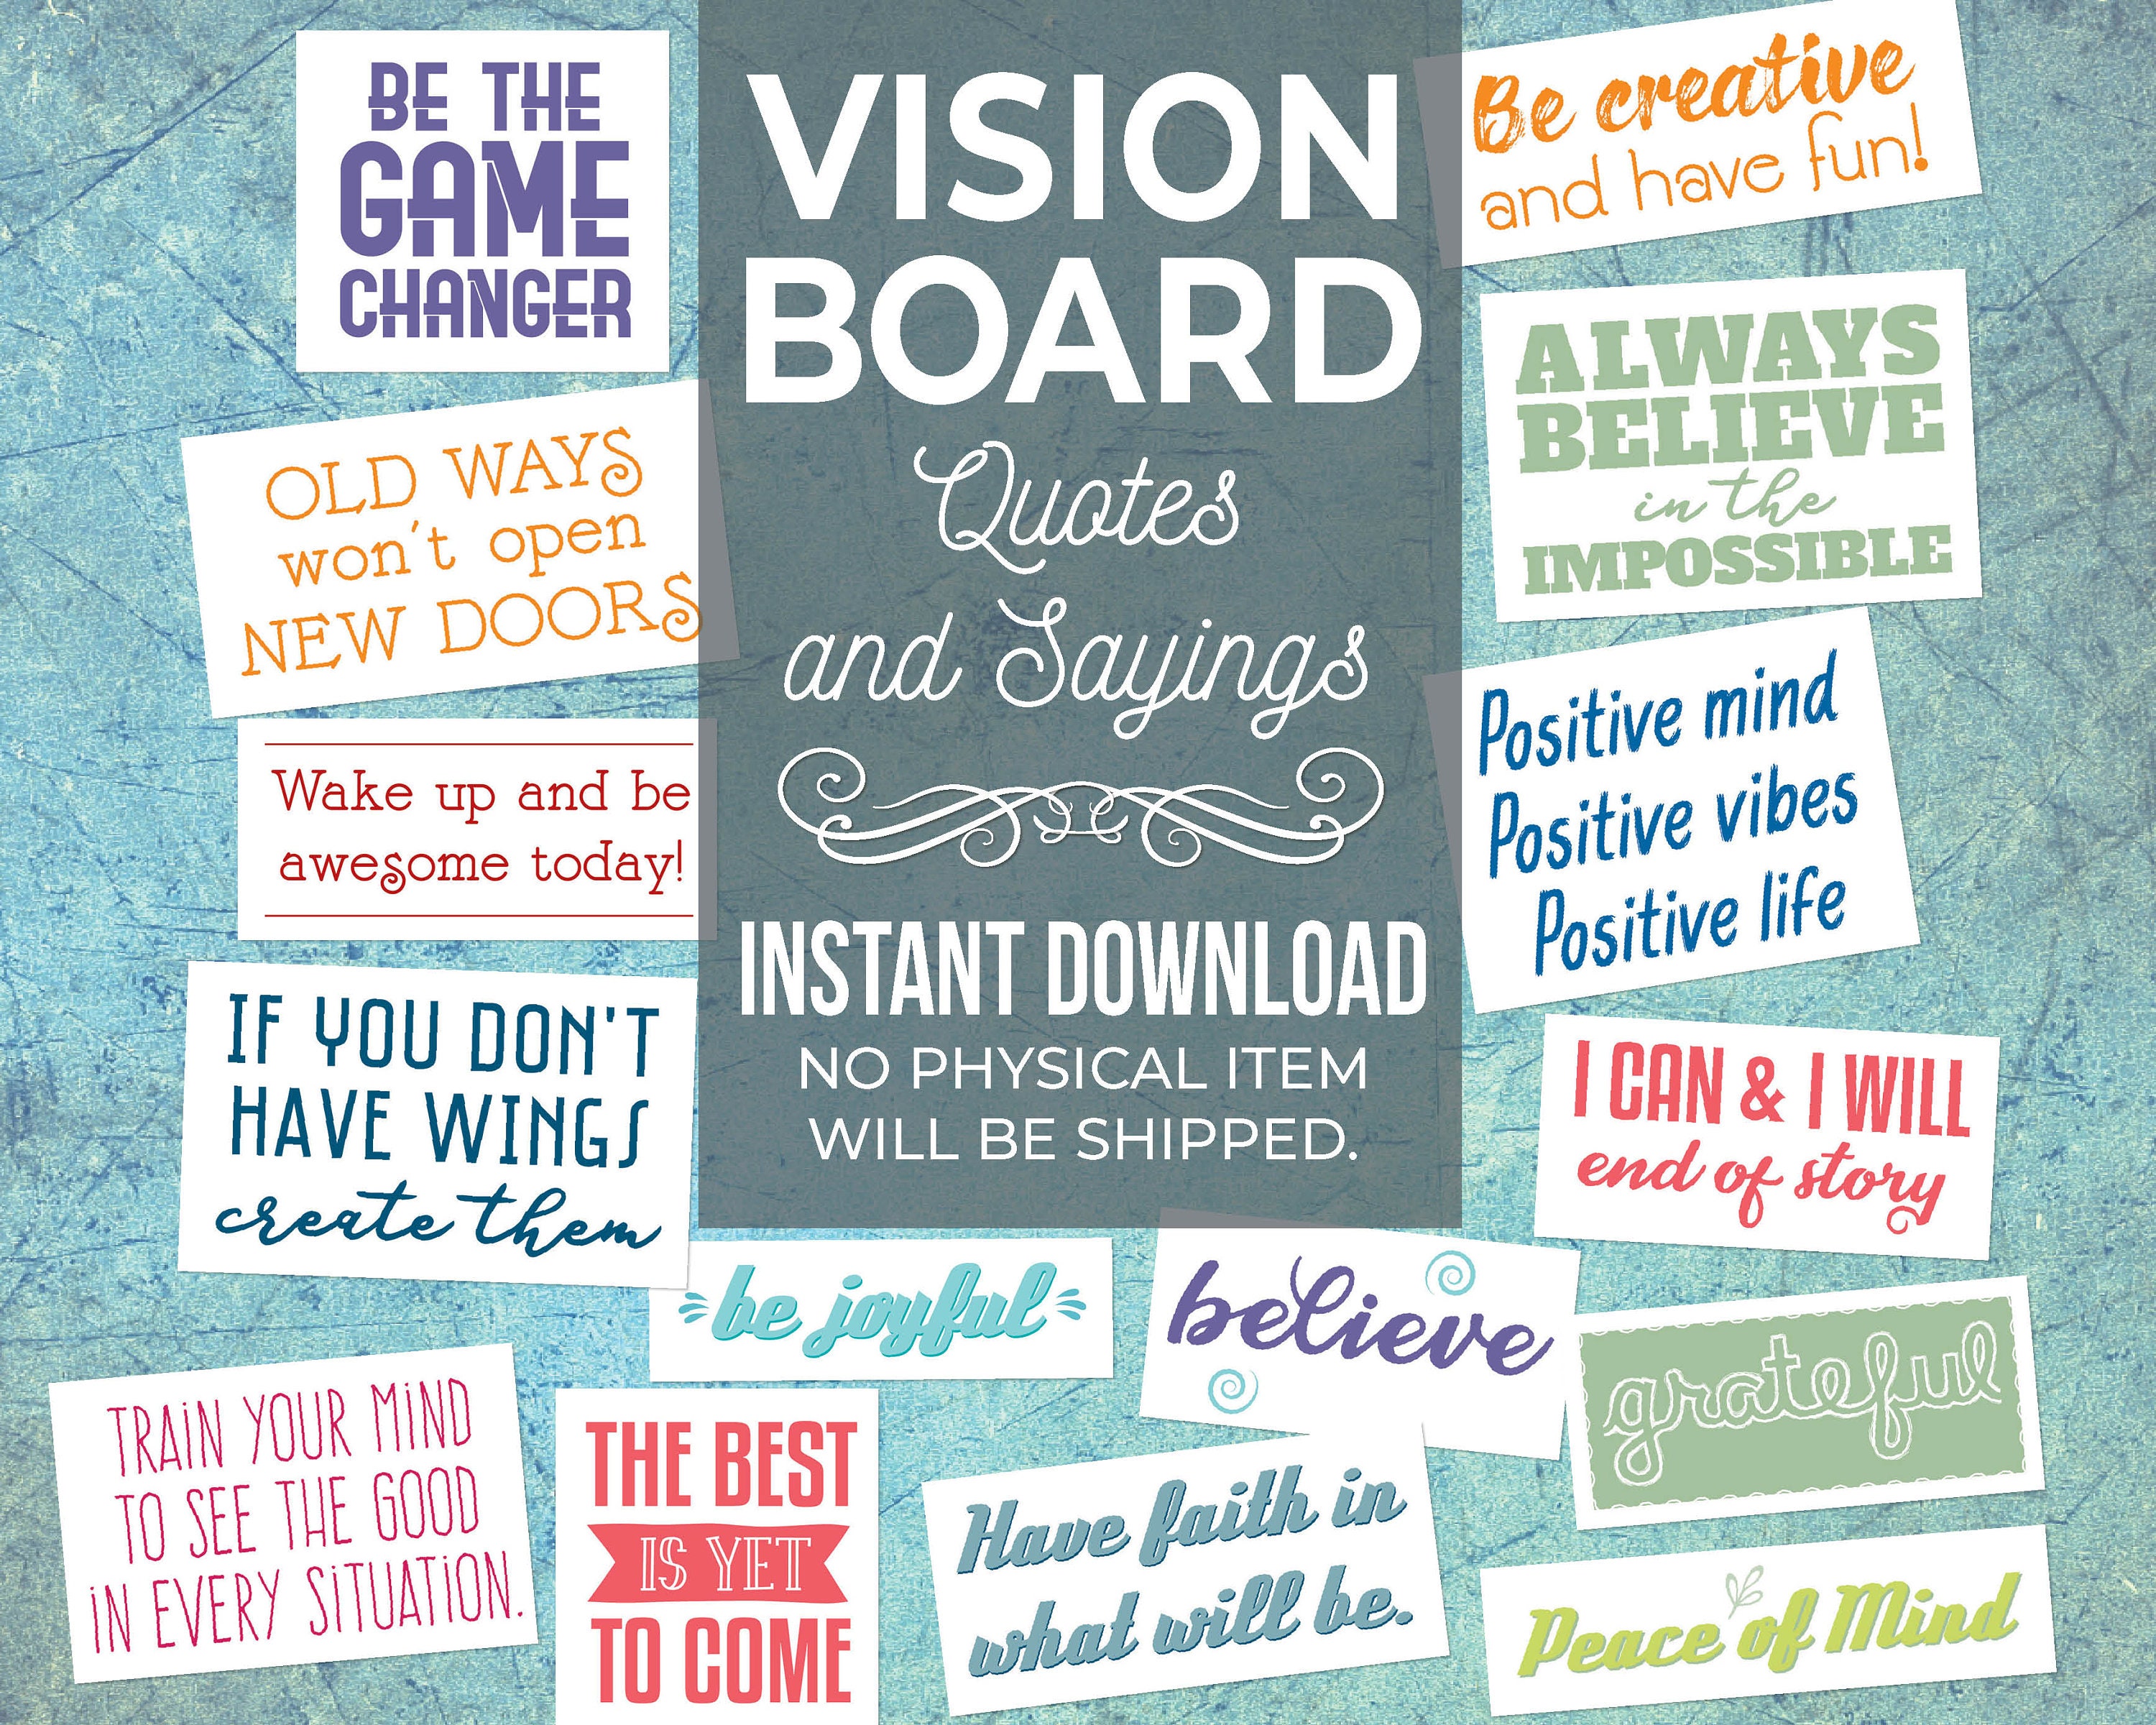 Vision Board Clip Art Book For Black Men: 200+ Pictures, Quotes